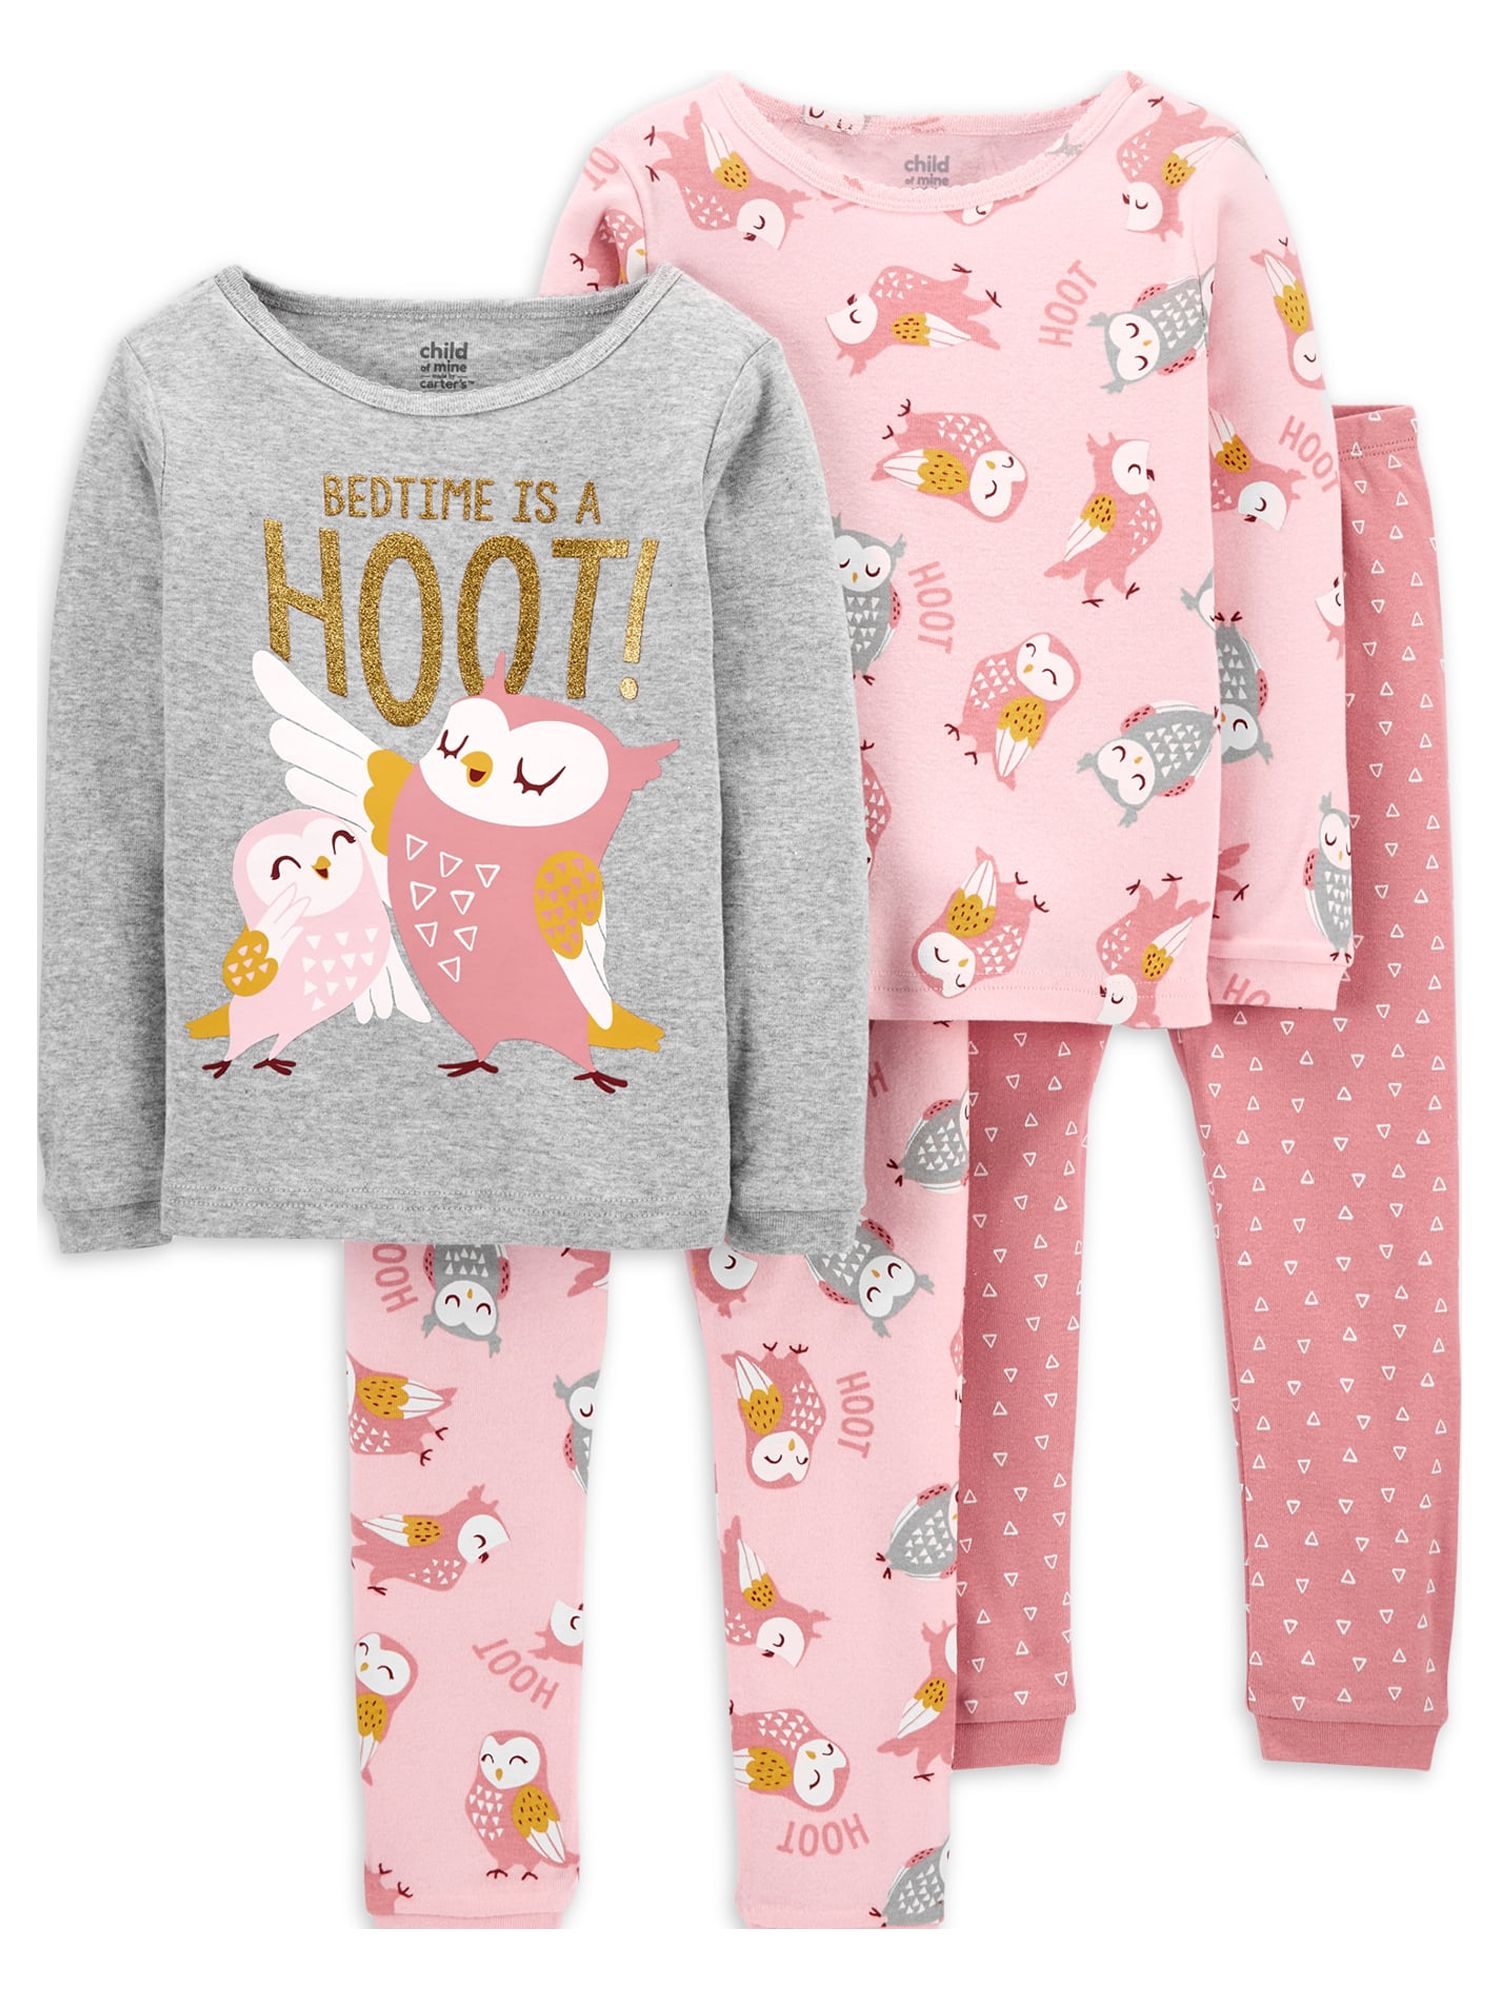 Carter's Child of Mine Toddler Girl Long Sleeve and Pants Snug-Fit Pajamas, 4-Piece, Sizes 12M-5T - image 1 of 3